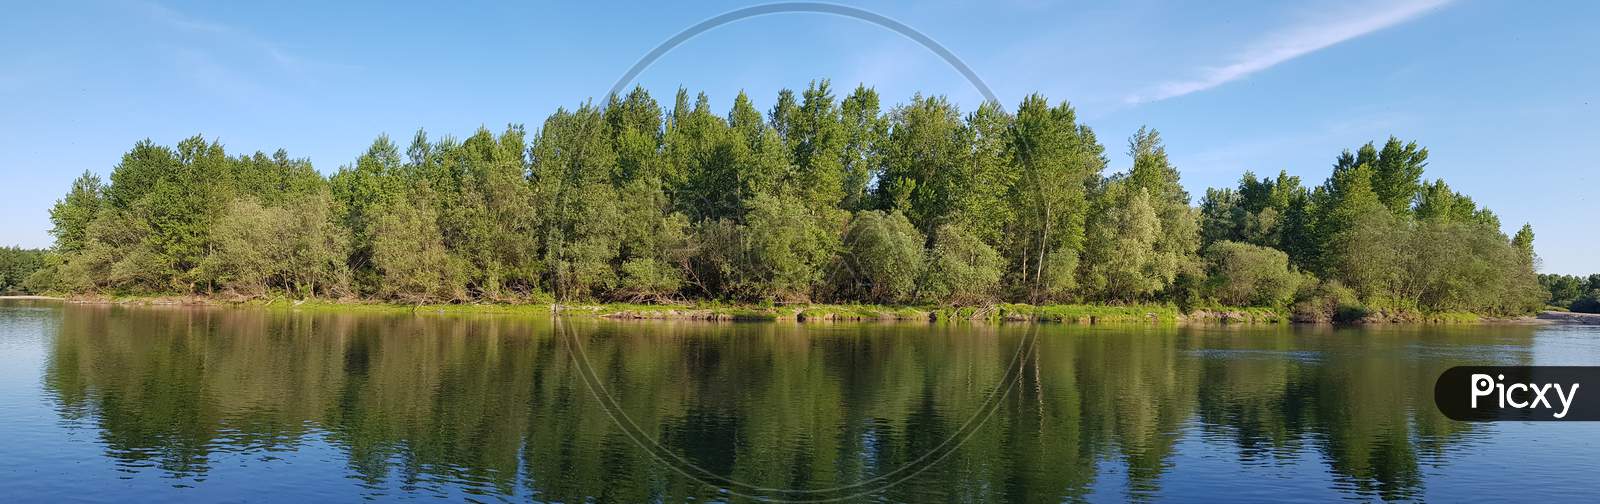 Beautiful Scenery Of A Range Of Green Trees Reflecting In The Lake